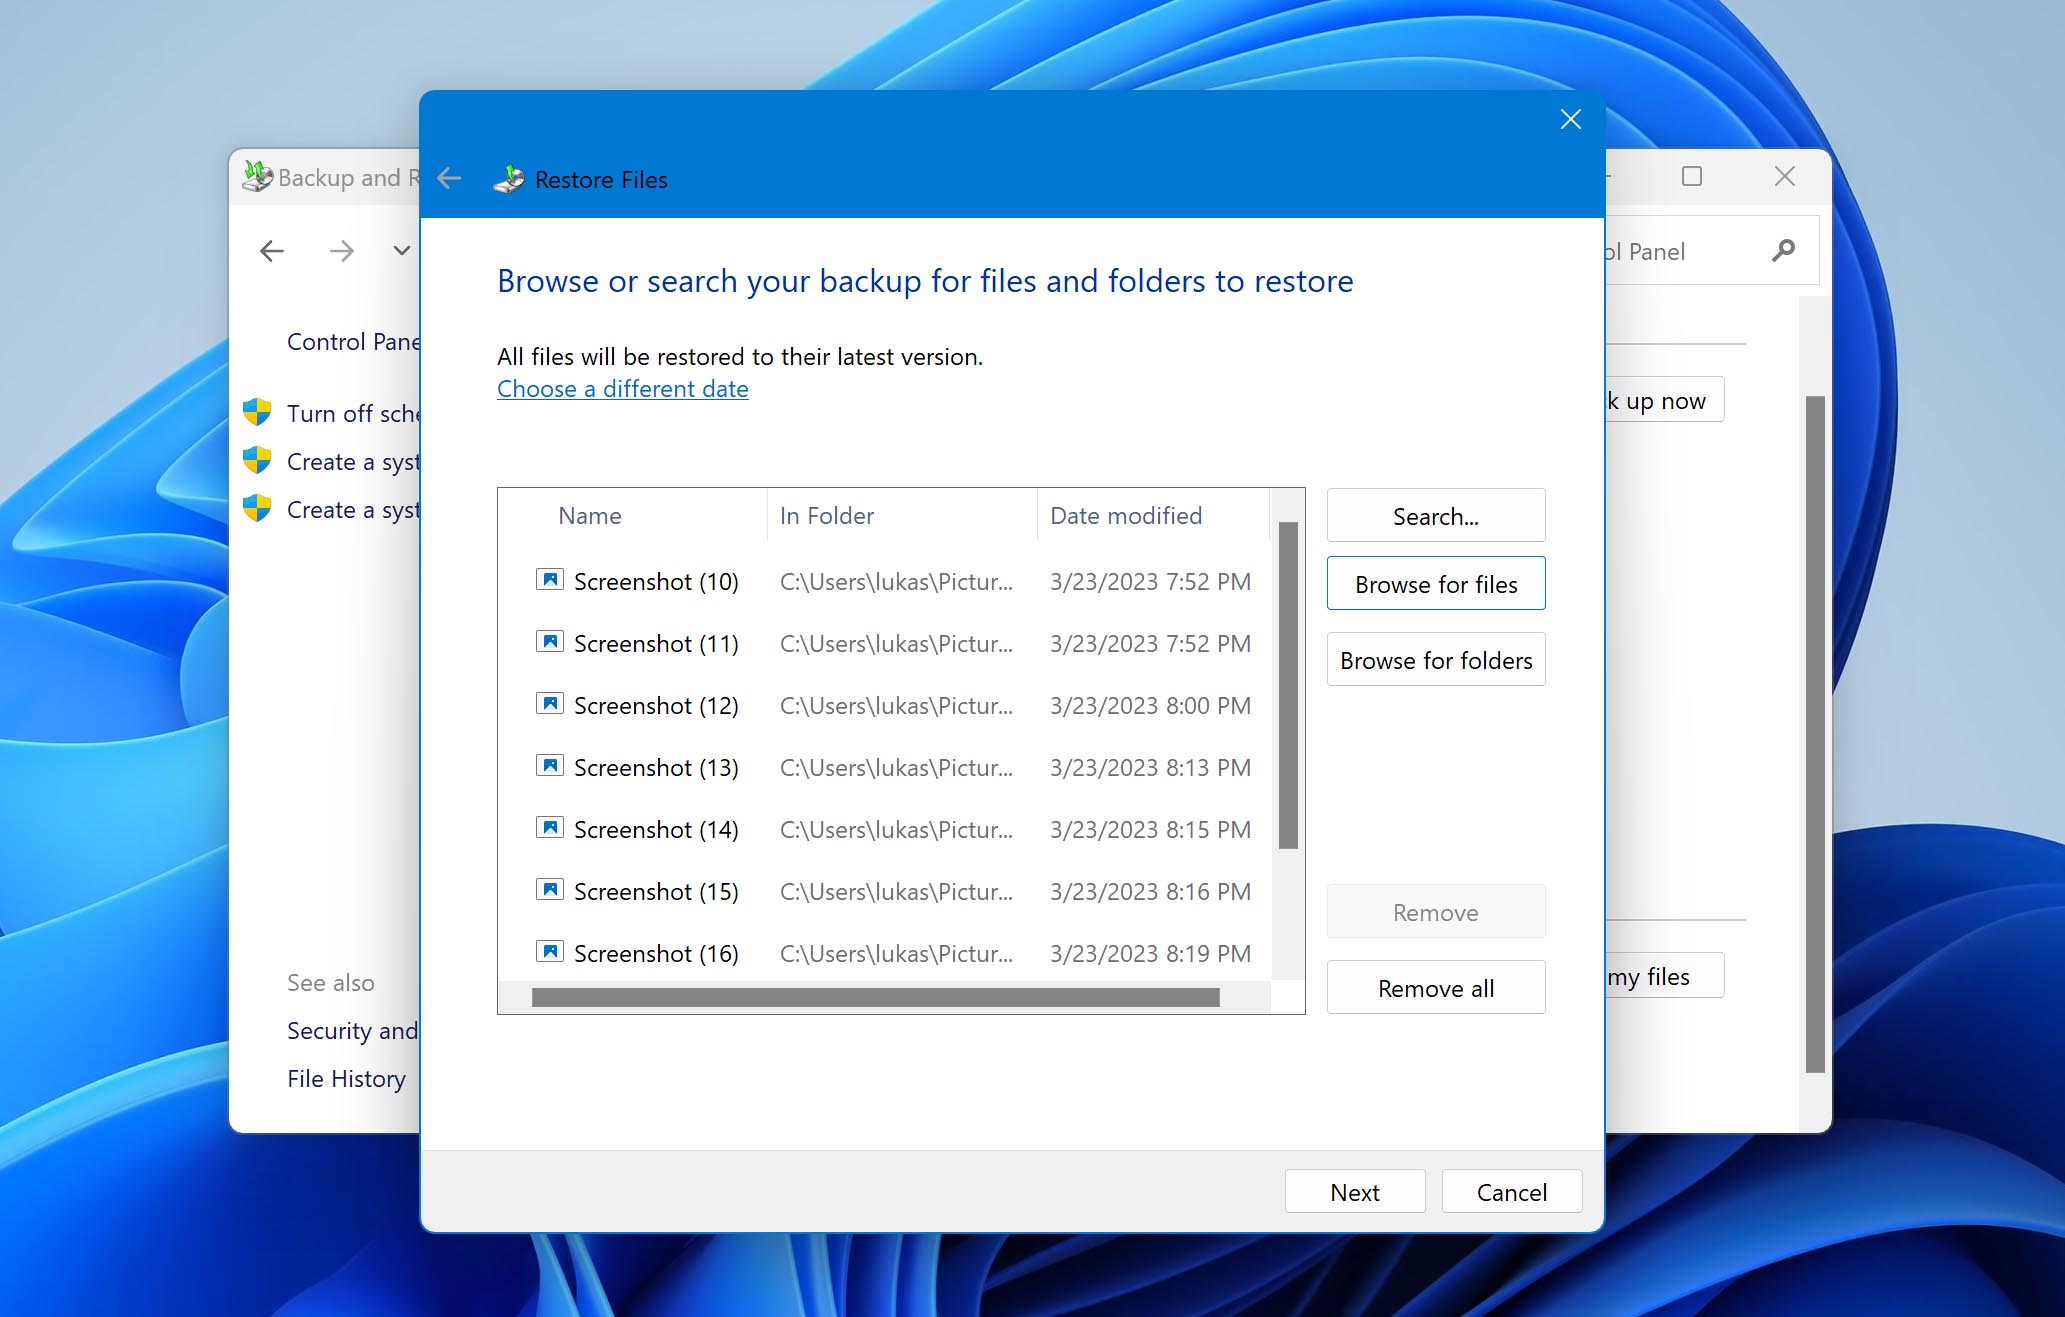 Visual demonstration of restoring files deleted from Recycle Bin on Windows 11 using Windows Backup and Restore feature